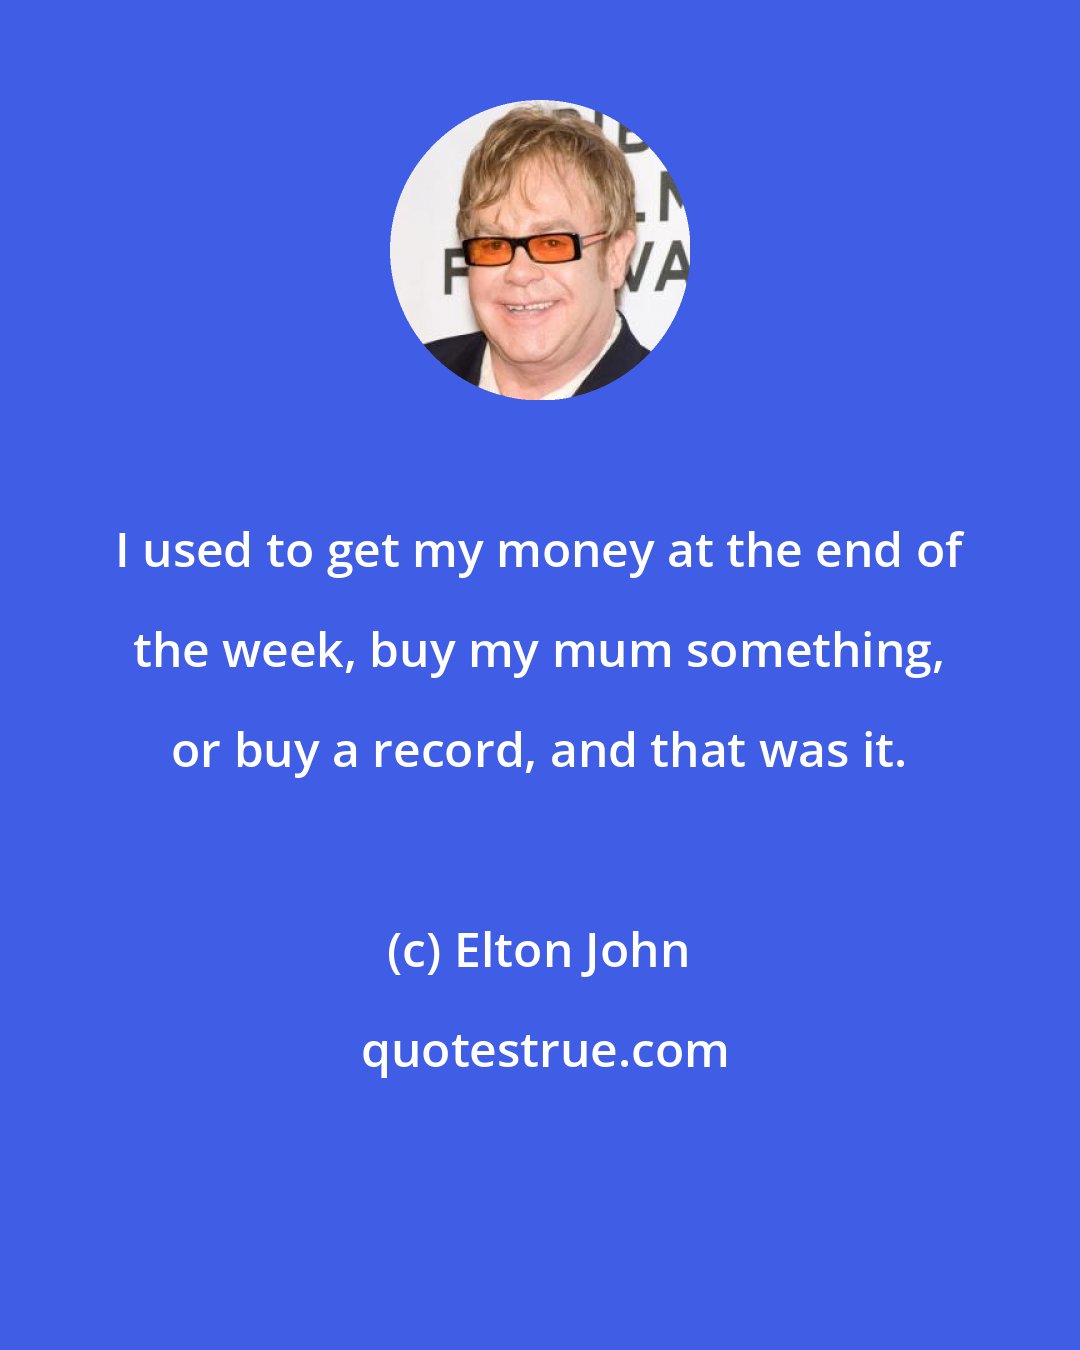 Elton John: I used to get my money at the end of the week, buy my mum something, or buy a record, and that was it.